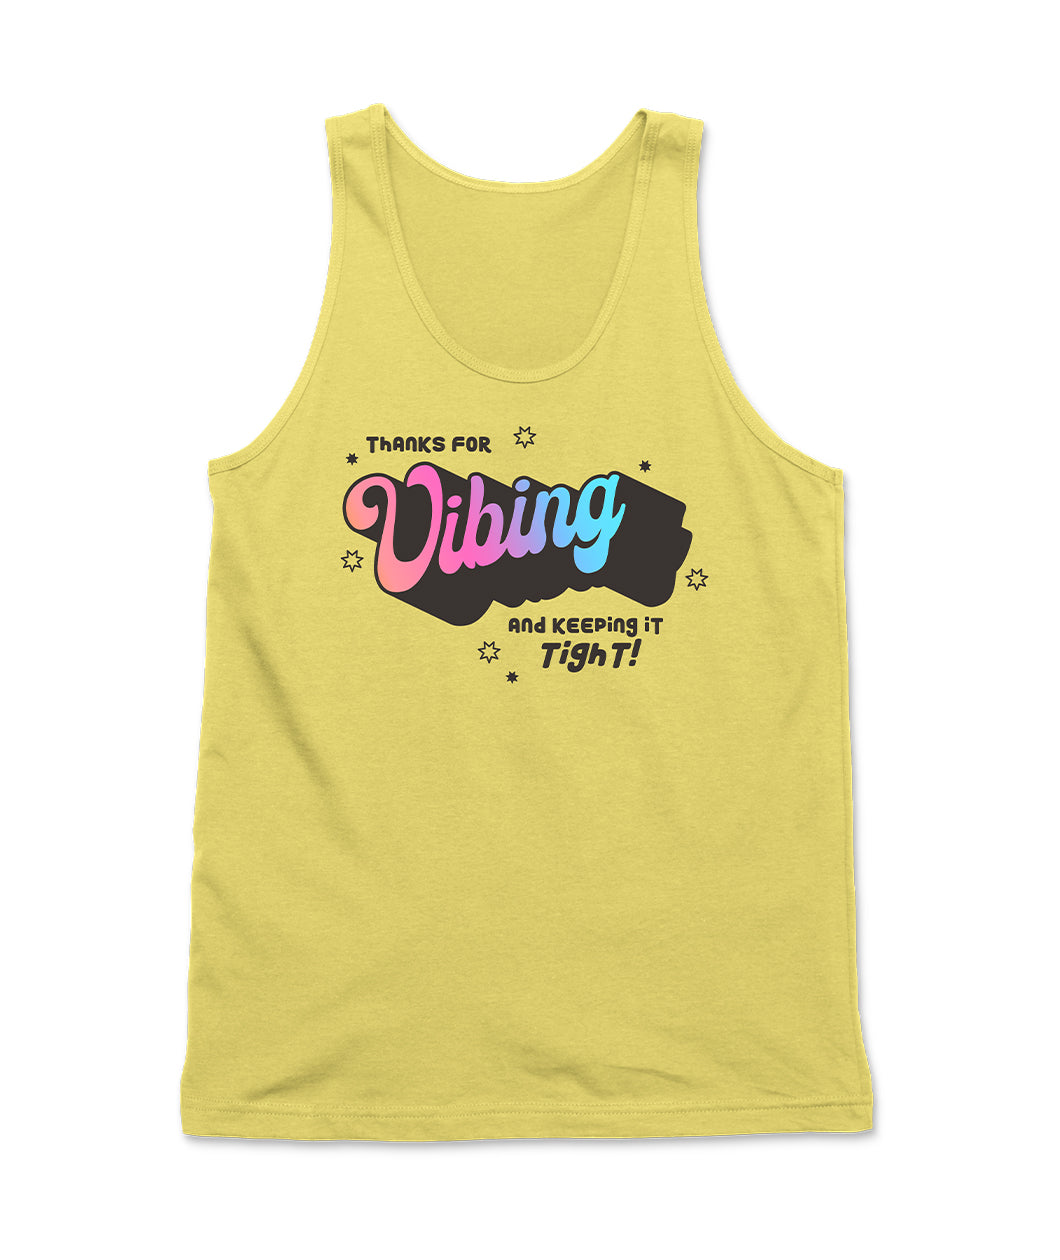 A yellow muscle tank that says, “Thanks for vibing and keeping it tight!” “Vibing” is written in a pink to blue ombre. There are sparkle shapes around the graphic.